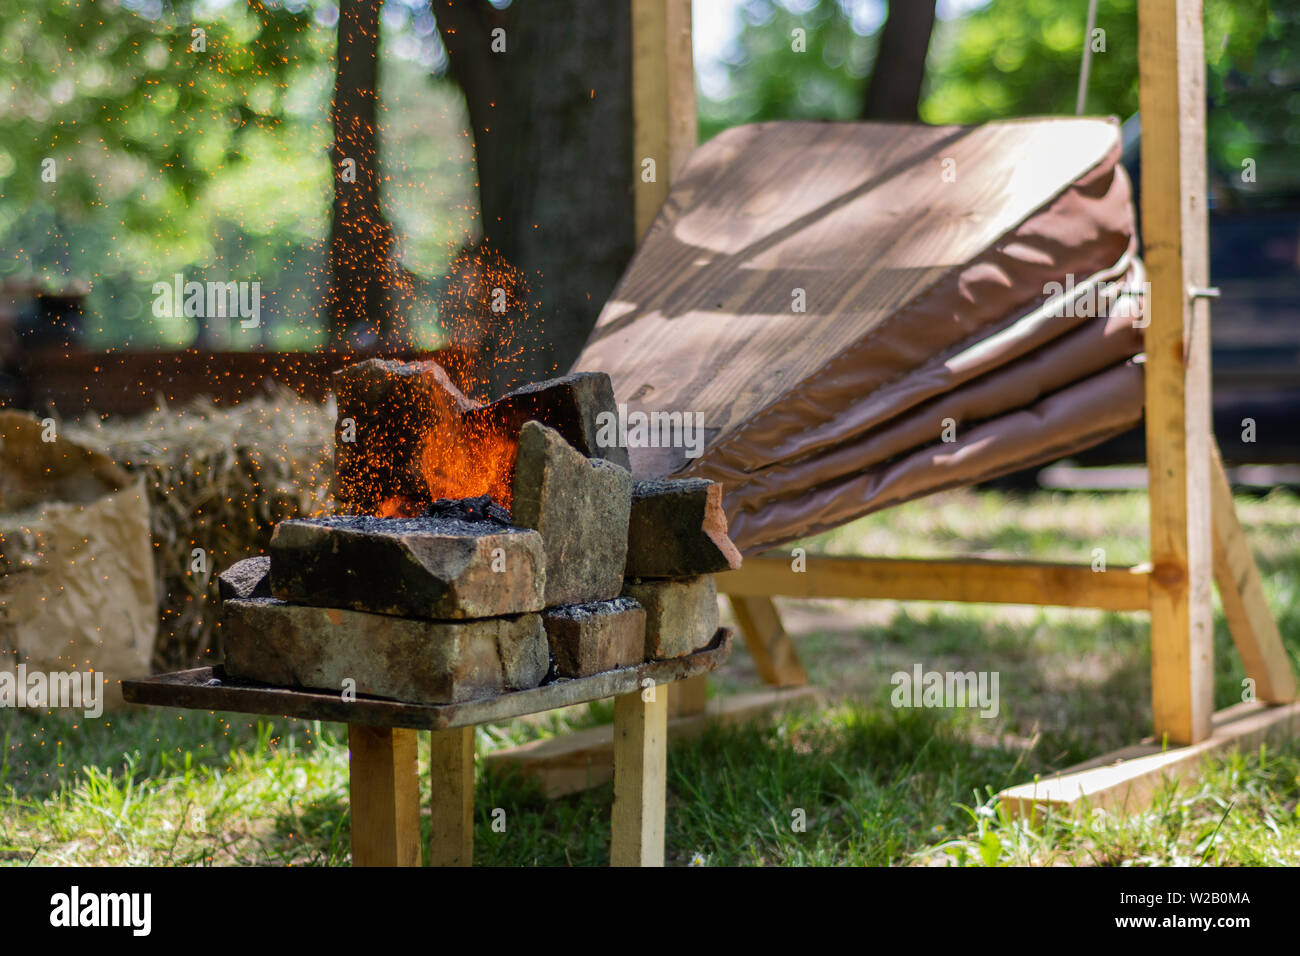 Medieval bellows make the fire of coals and sparks fly from outdoor blacksmith tool. The process of making swords and other metal tools Stock Photo